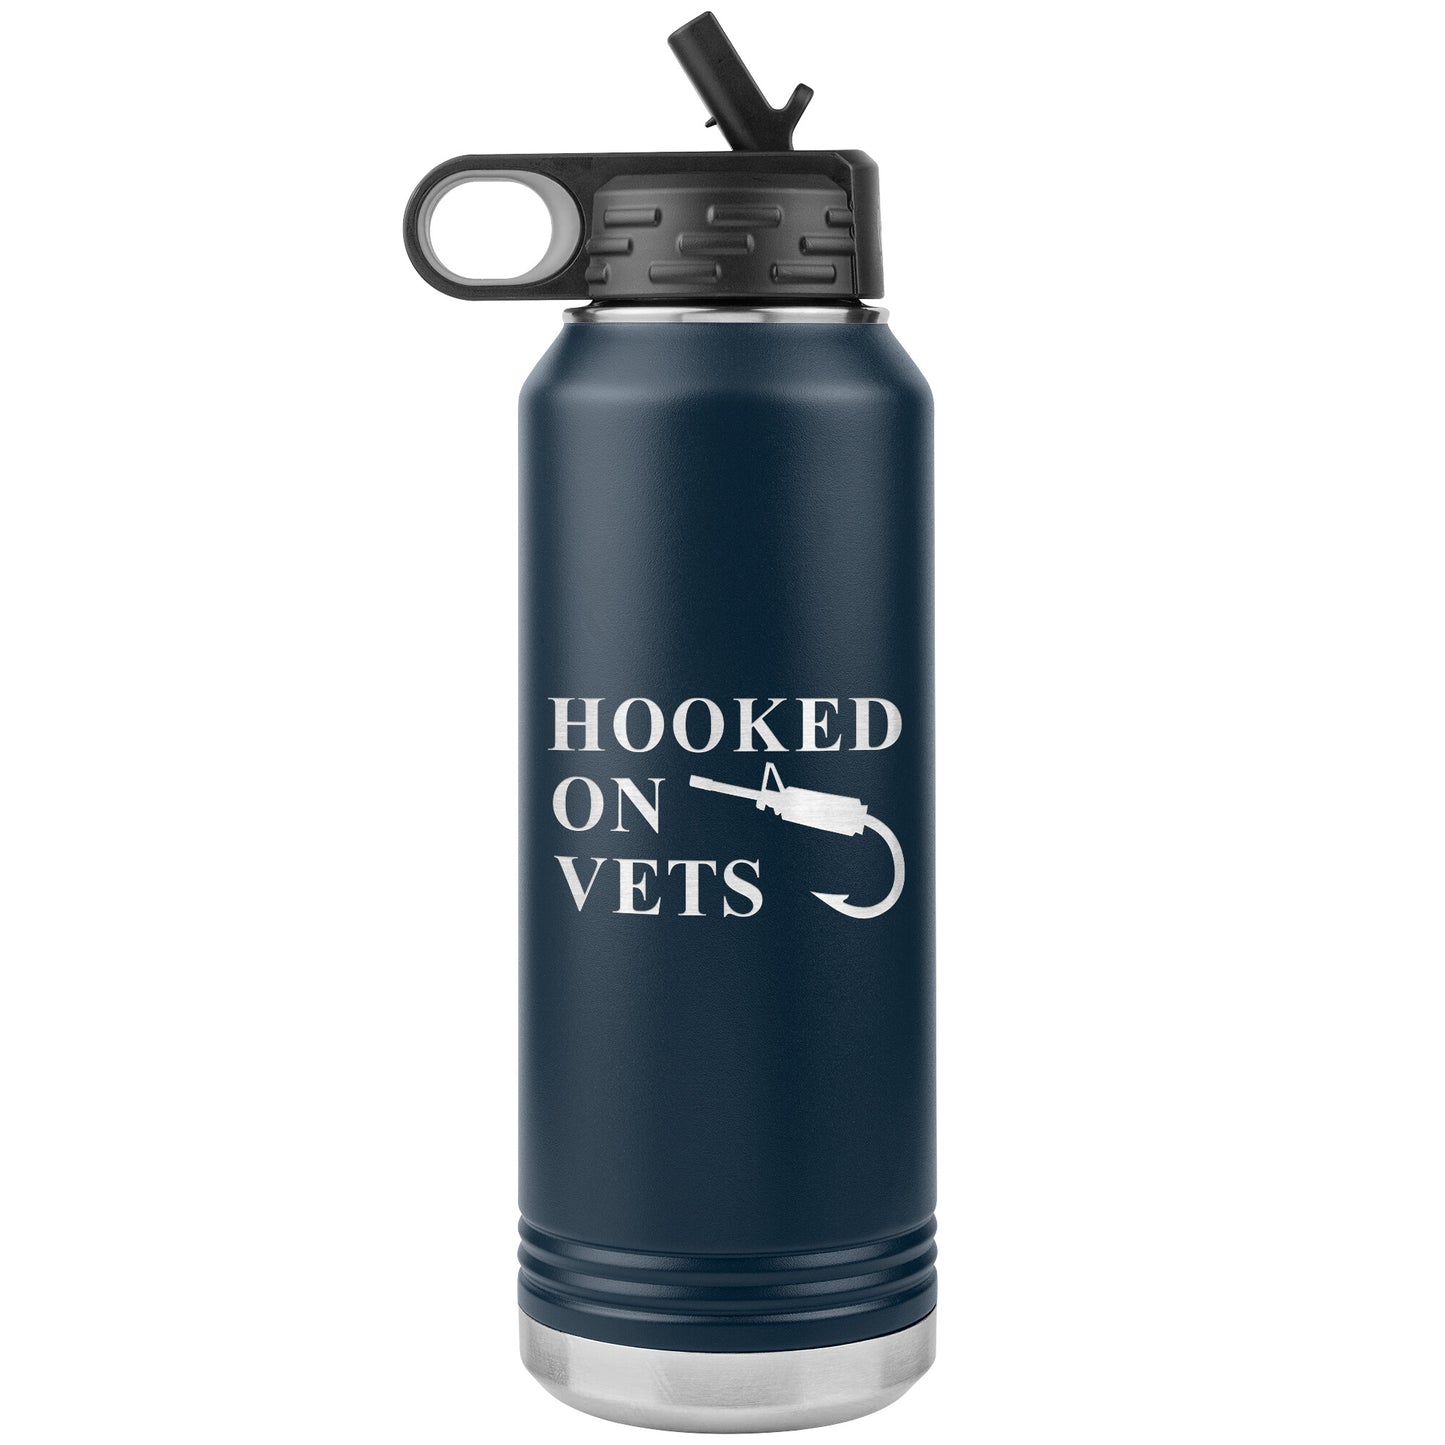 HOOKED ON VETS - 32oz Insulated Water Bottle